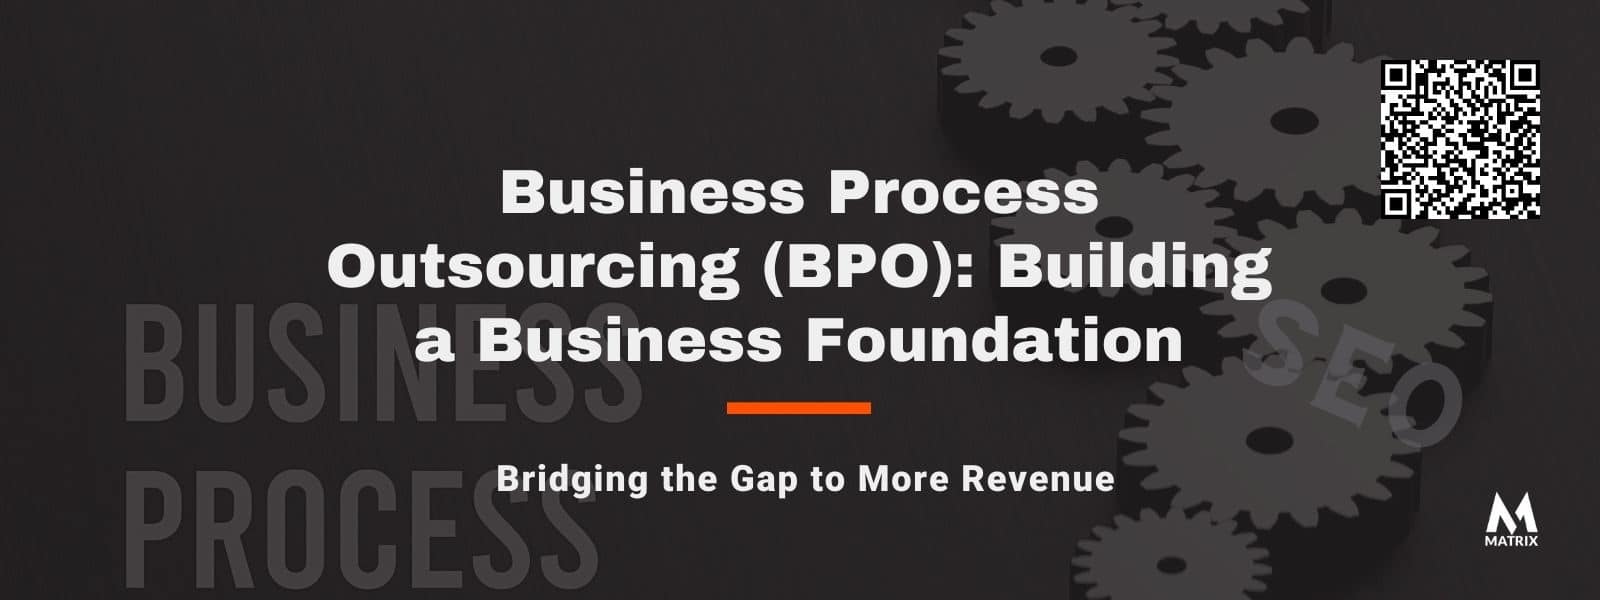 business process outsourcing marketing seo